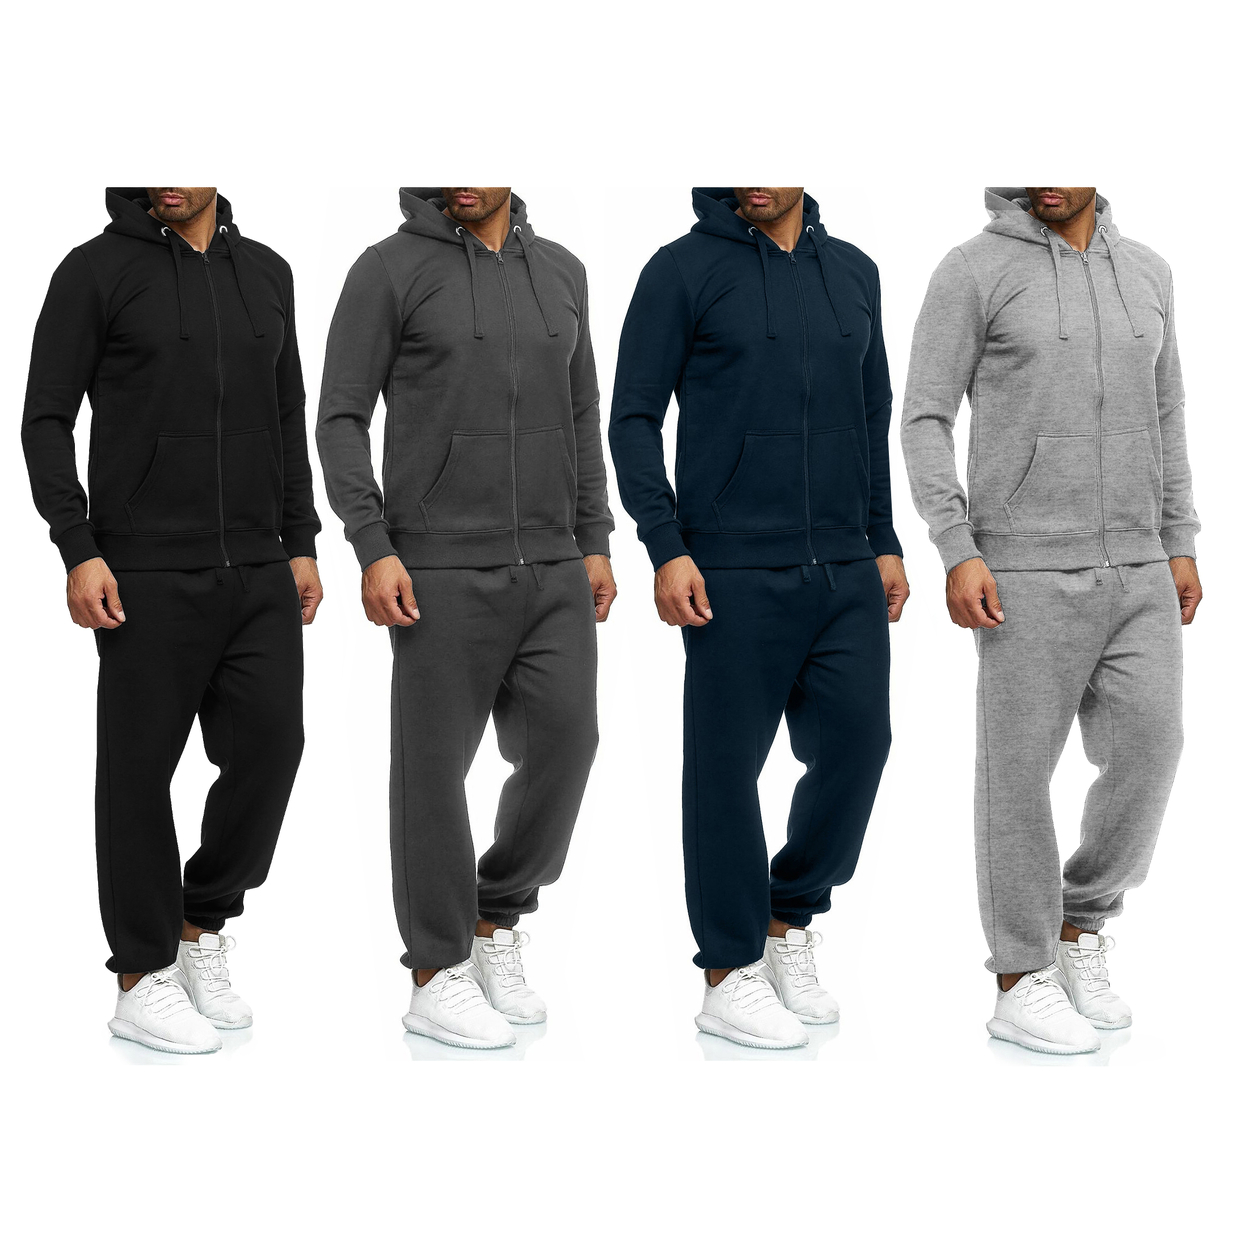 Multi-Pack: Men's Casual Big & Tall Athletic Active Winter Warm Fleece Lined Full Zip Tracksuit Jogger Set - Charcoal, 1-pack, Medium